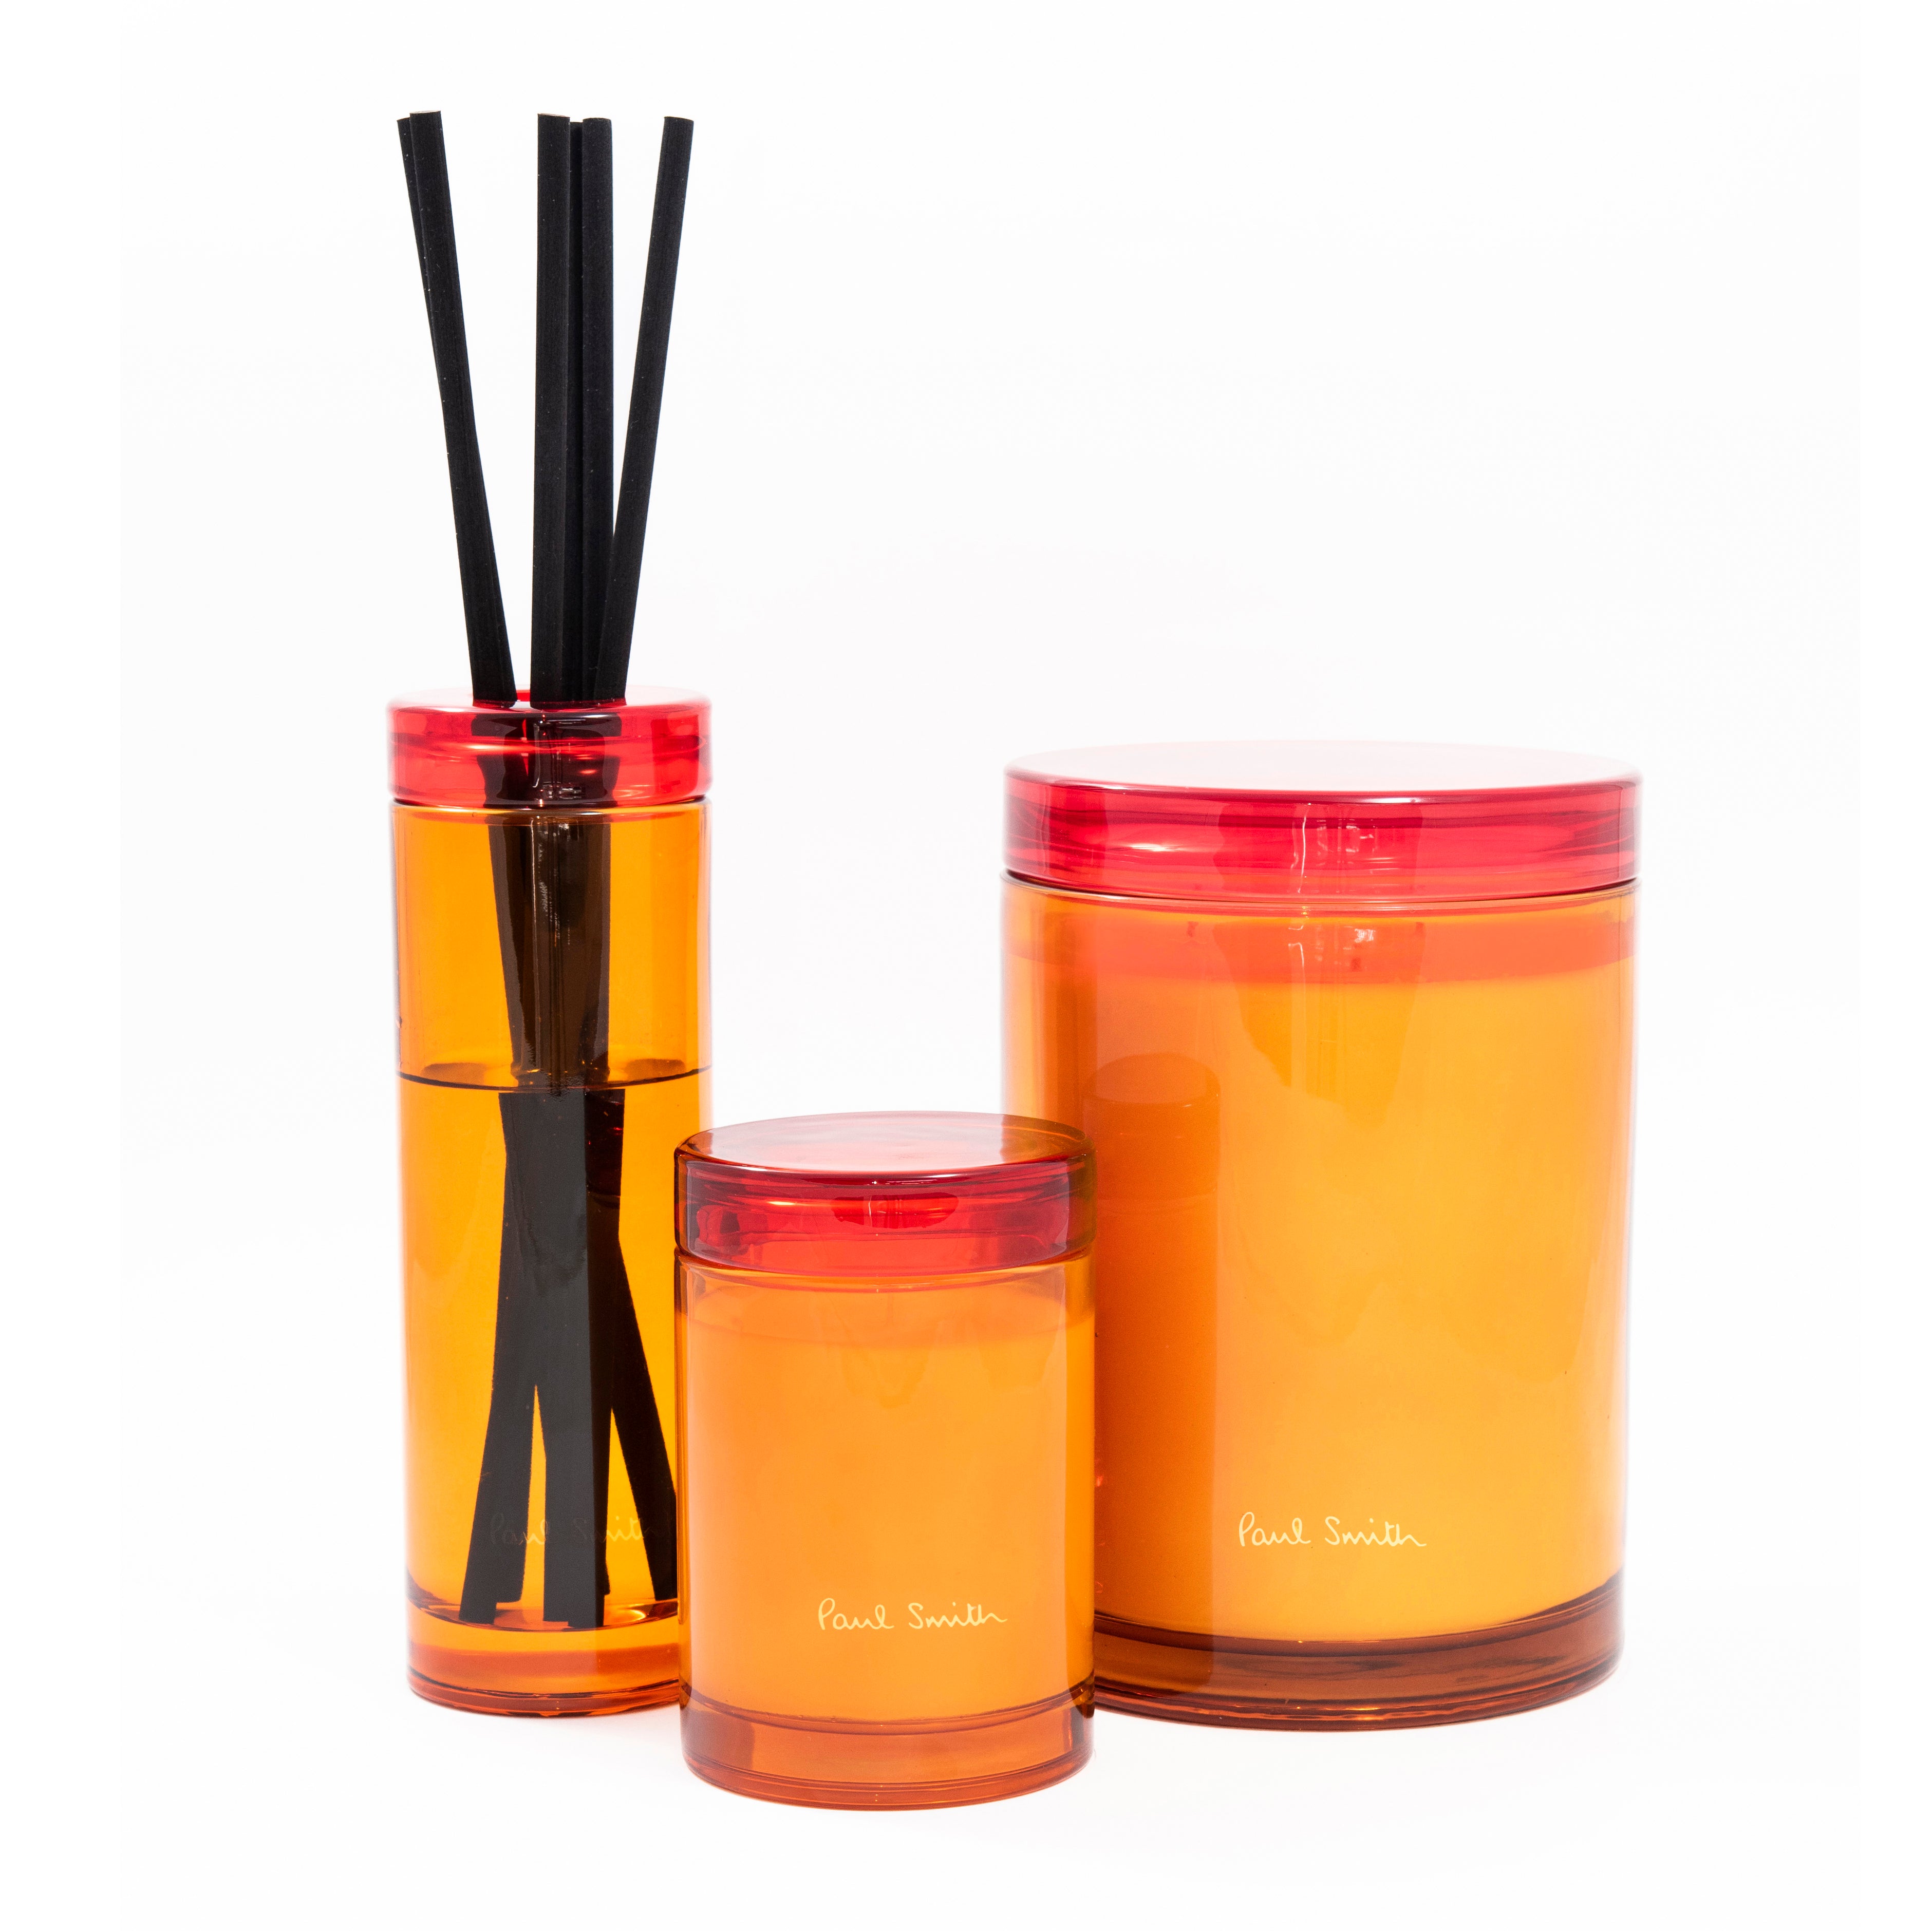 Paul Smith Bookworm Candle  240g